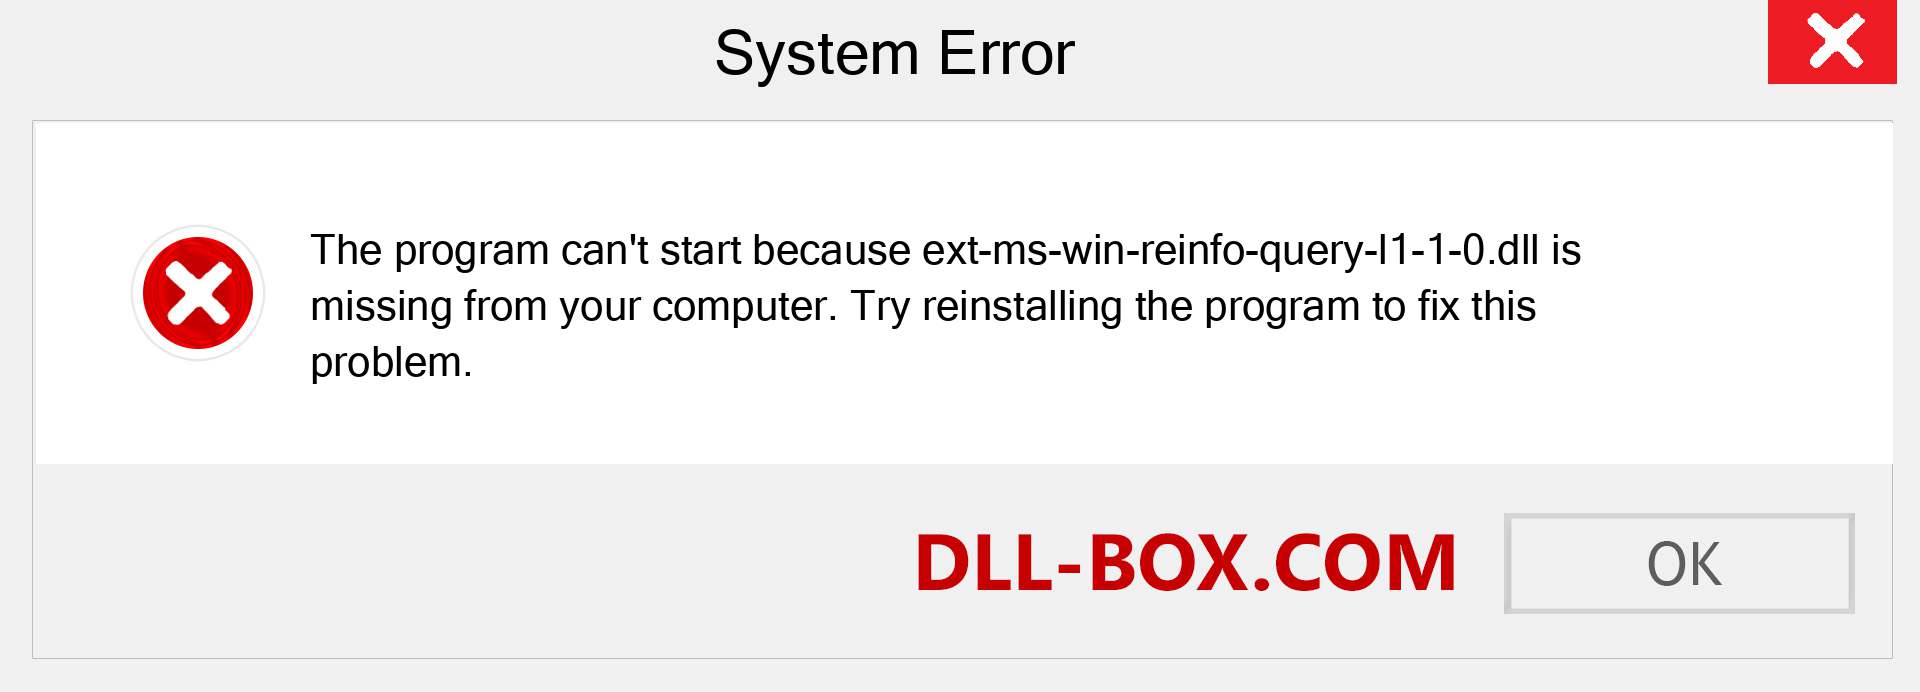  ext-ms-win-reinfo-query-l1-1-0.dll file is missing?. Download for Windows 7, 8, 10 - Fix  ext-ms-win-reinfo-query-l1-1-0 dll Missing Error on Windows, photos, images